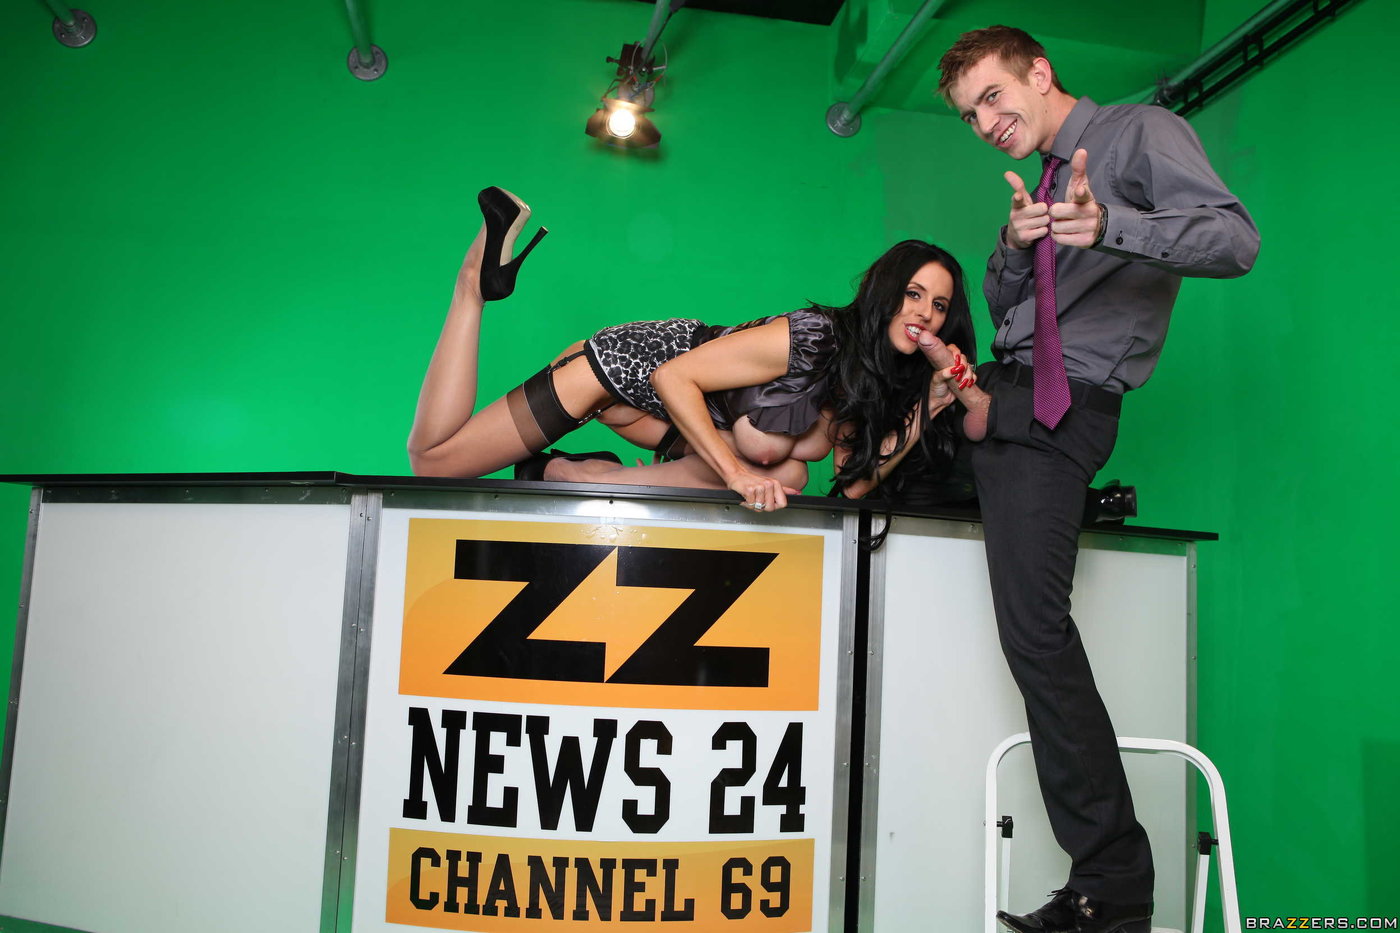 Zz News 24 Channel 69 - Seductive brunette MILF with massive tits gets fucked on live TV -  IamXXX.com